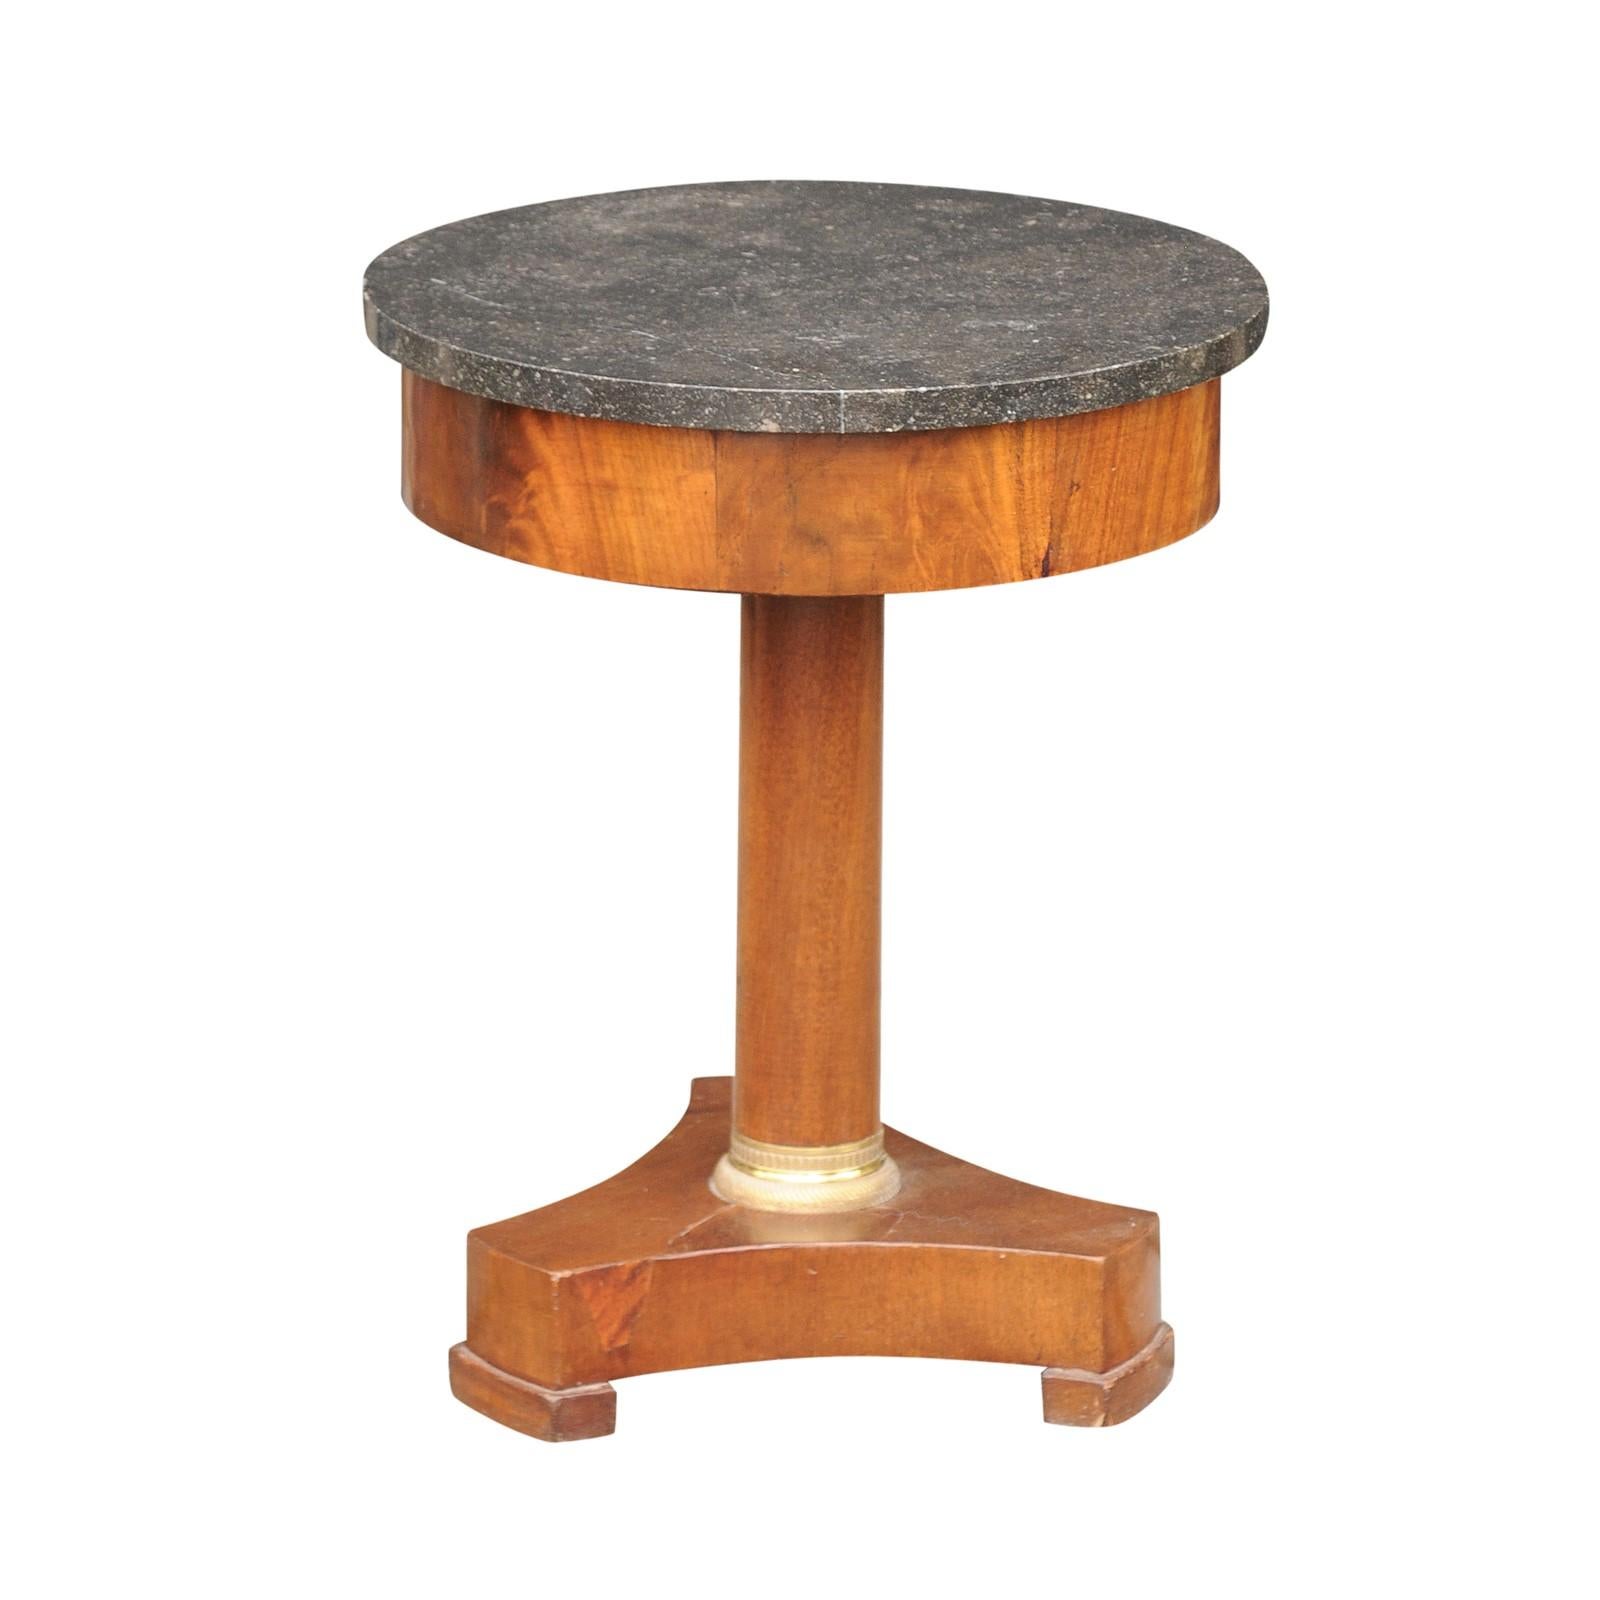 Petite 1870s French Empire Style Guéridon Table with Marble Top and Pedestal